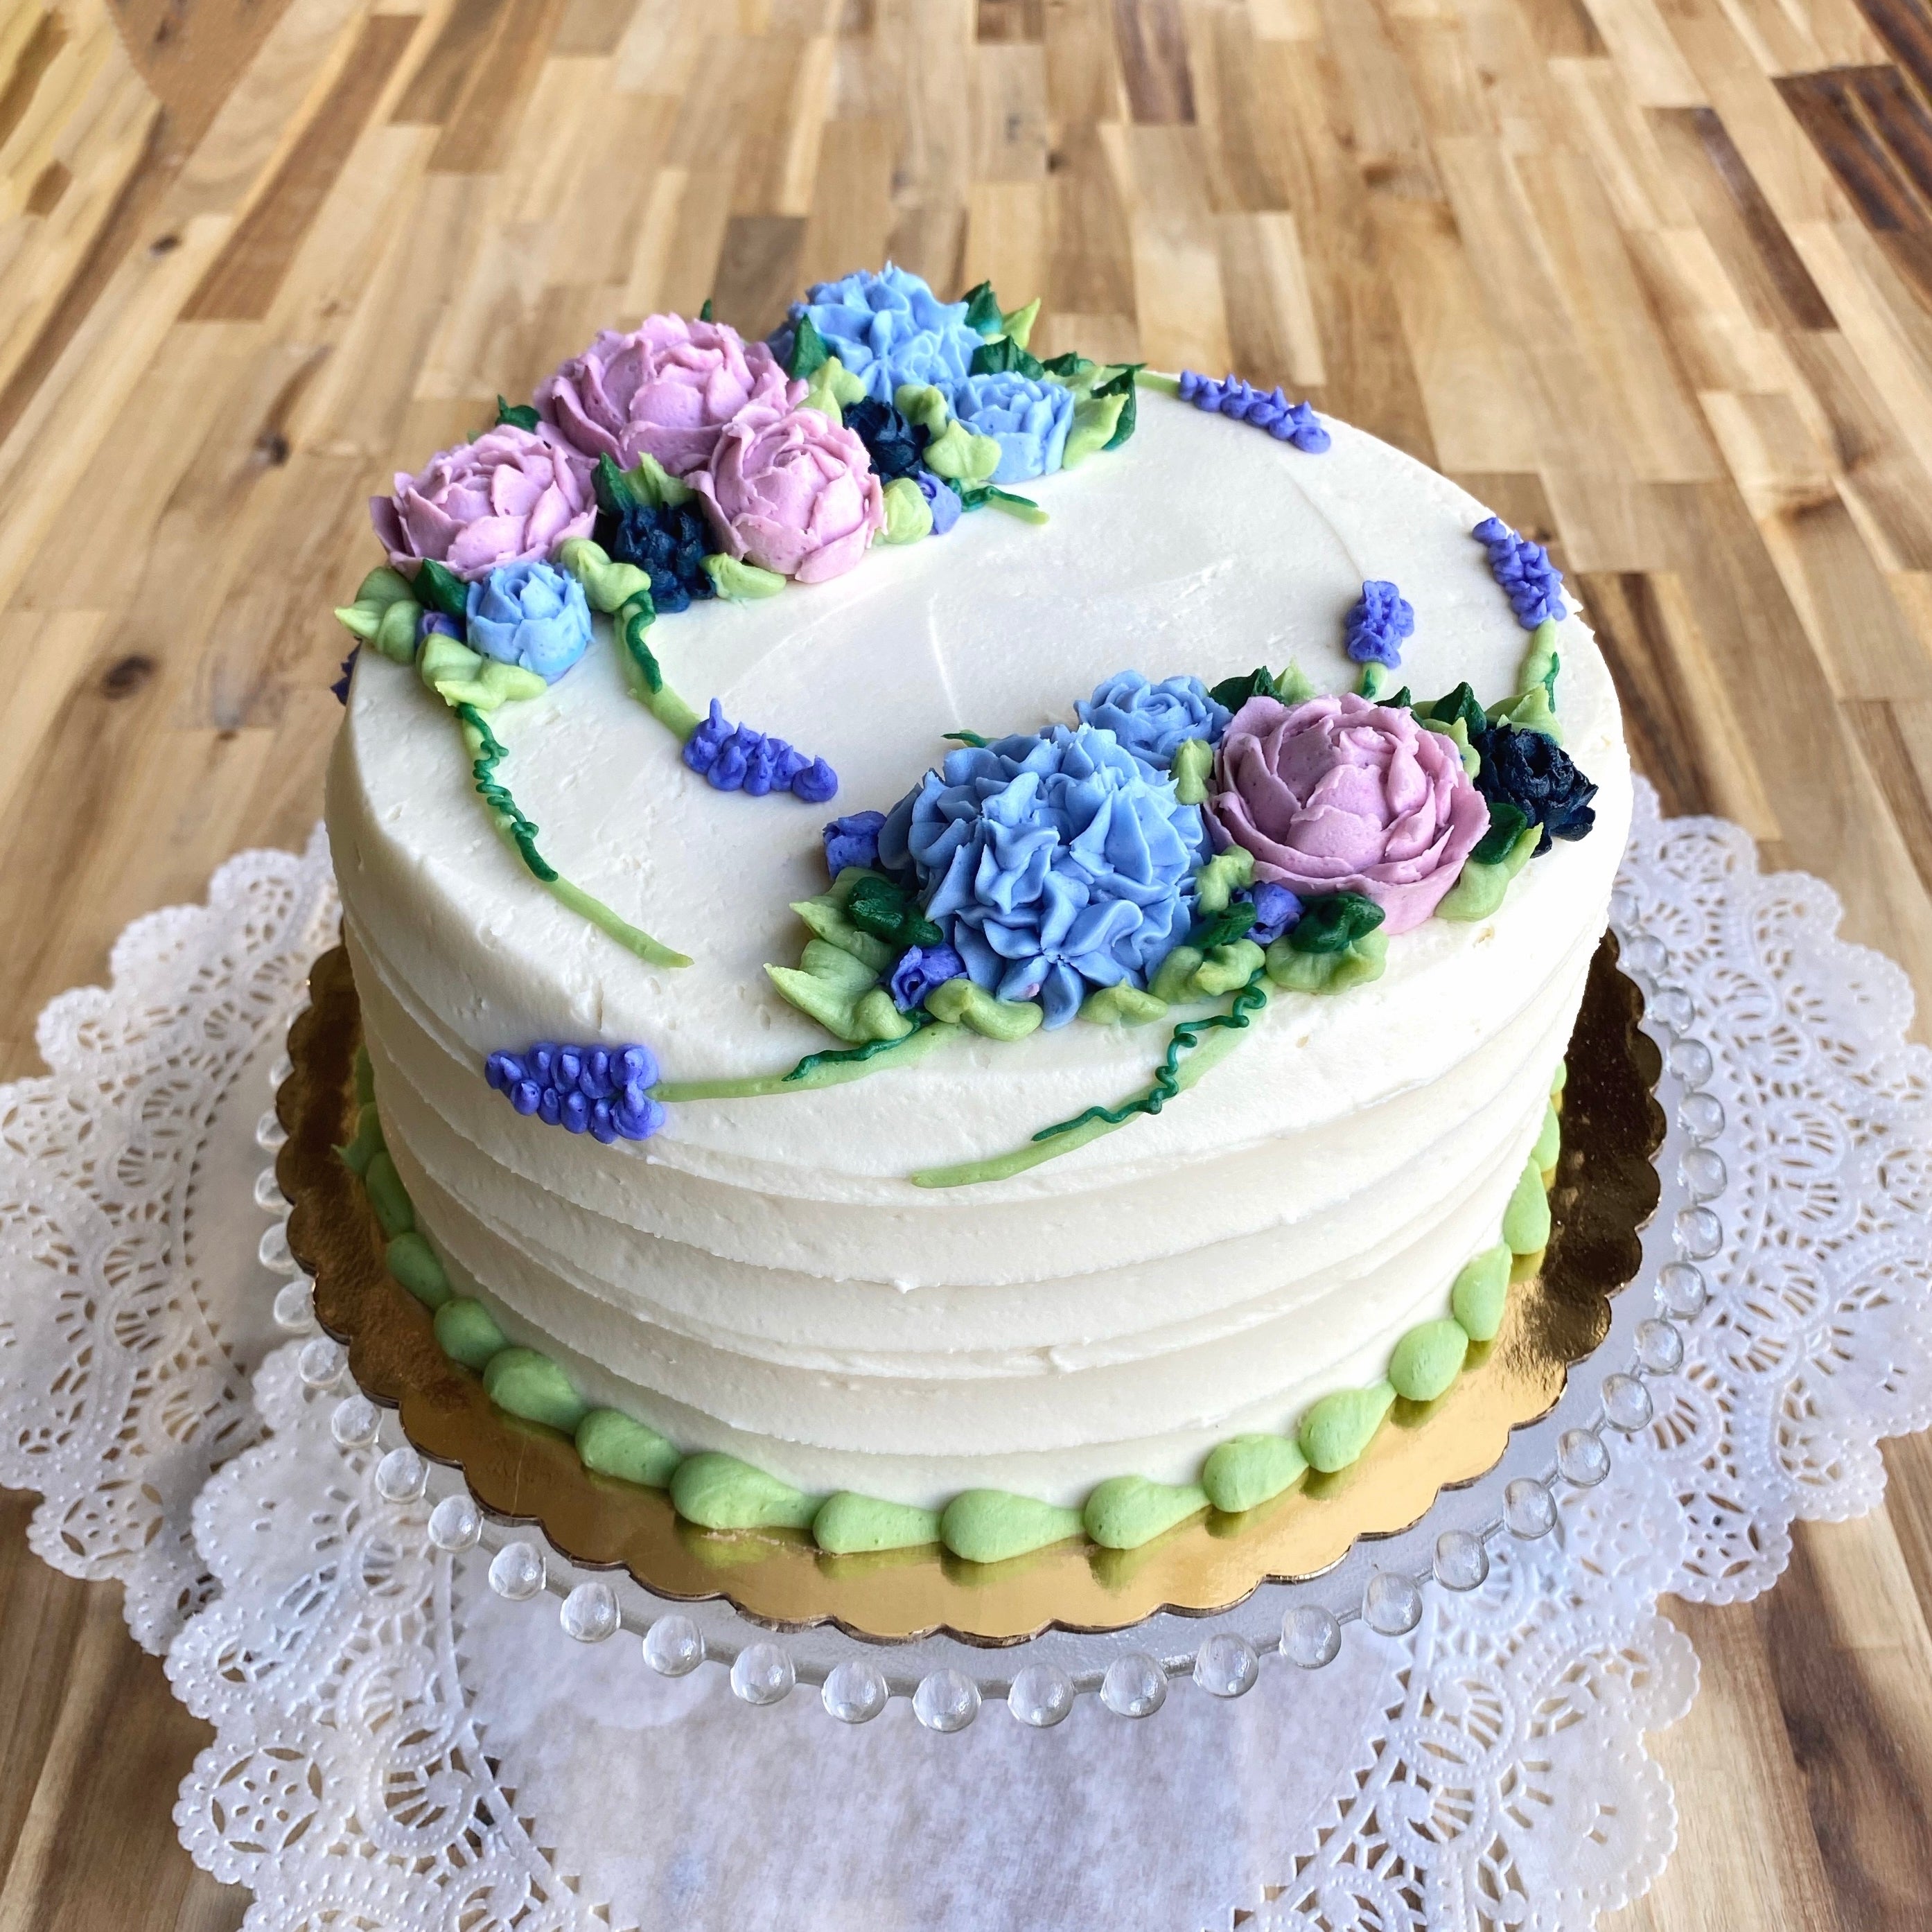 purple floral cake. | Pretty birthday cakes, Cake decorating classes, Learn  cake decorating